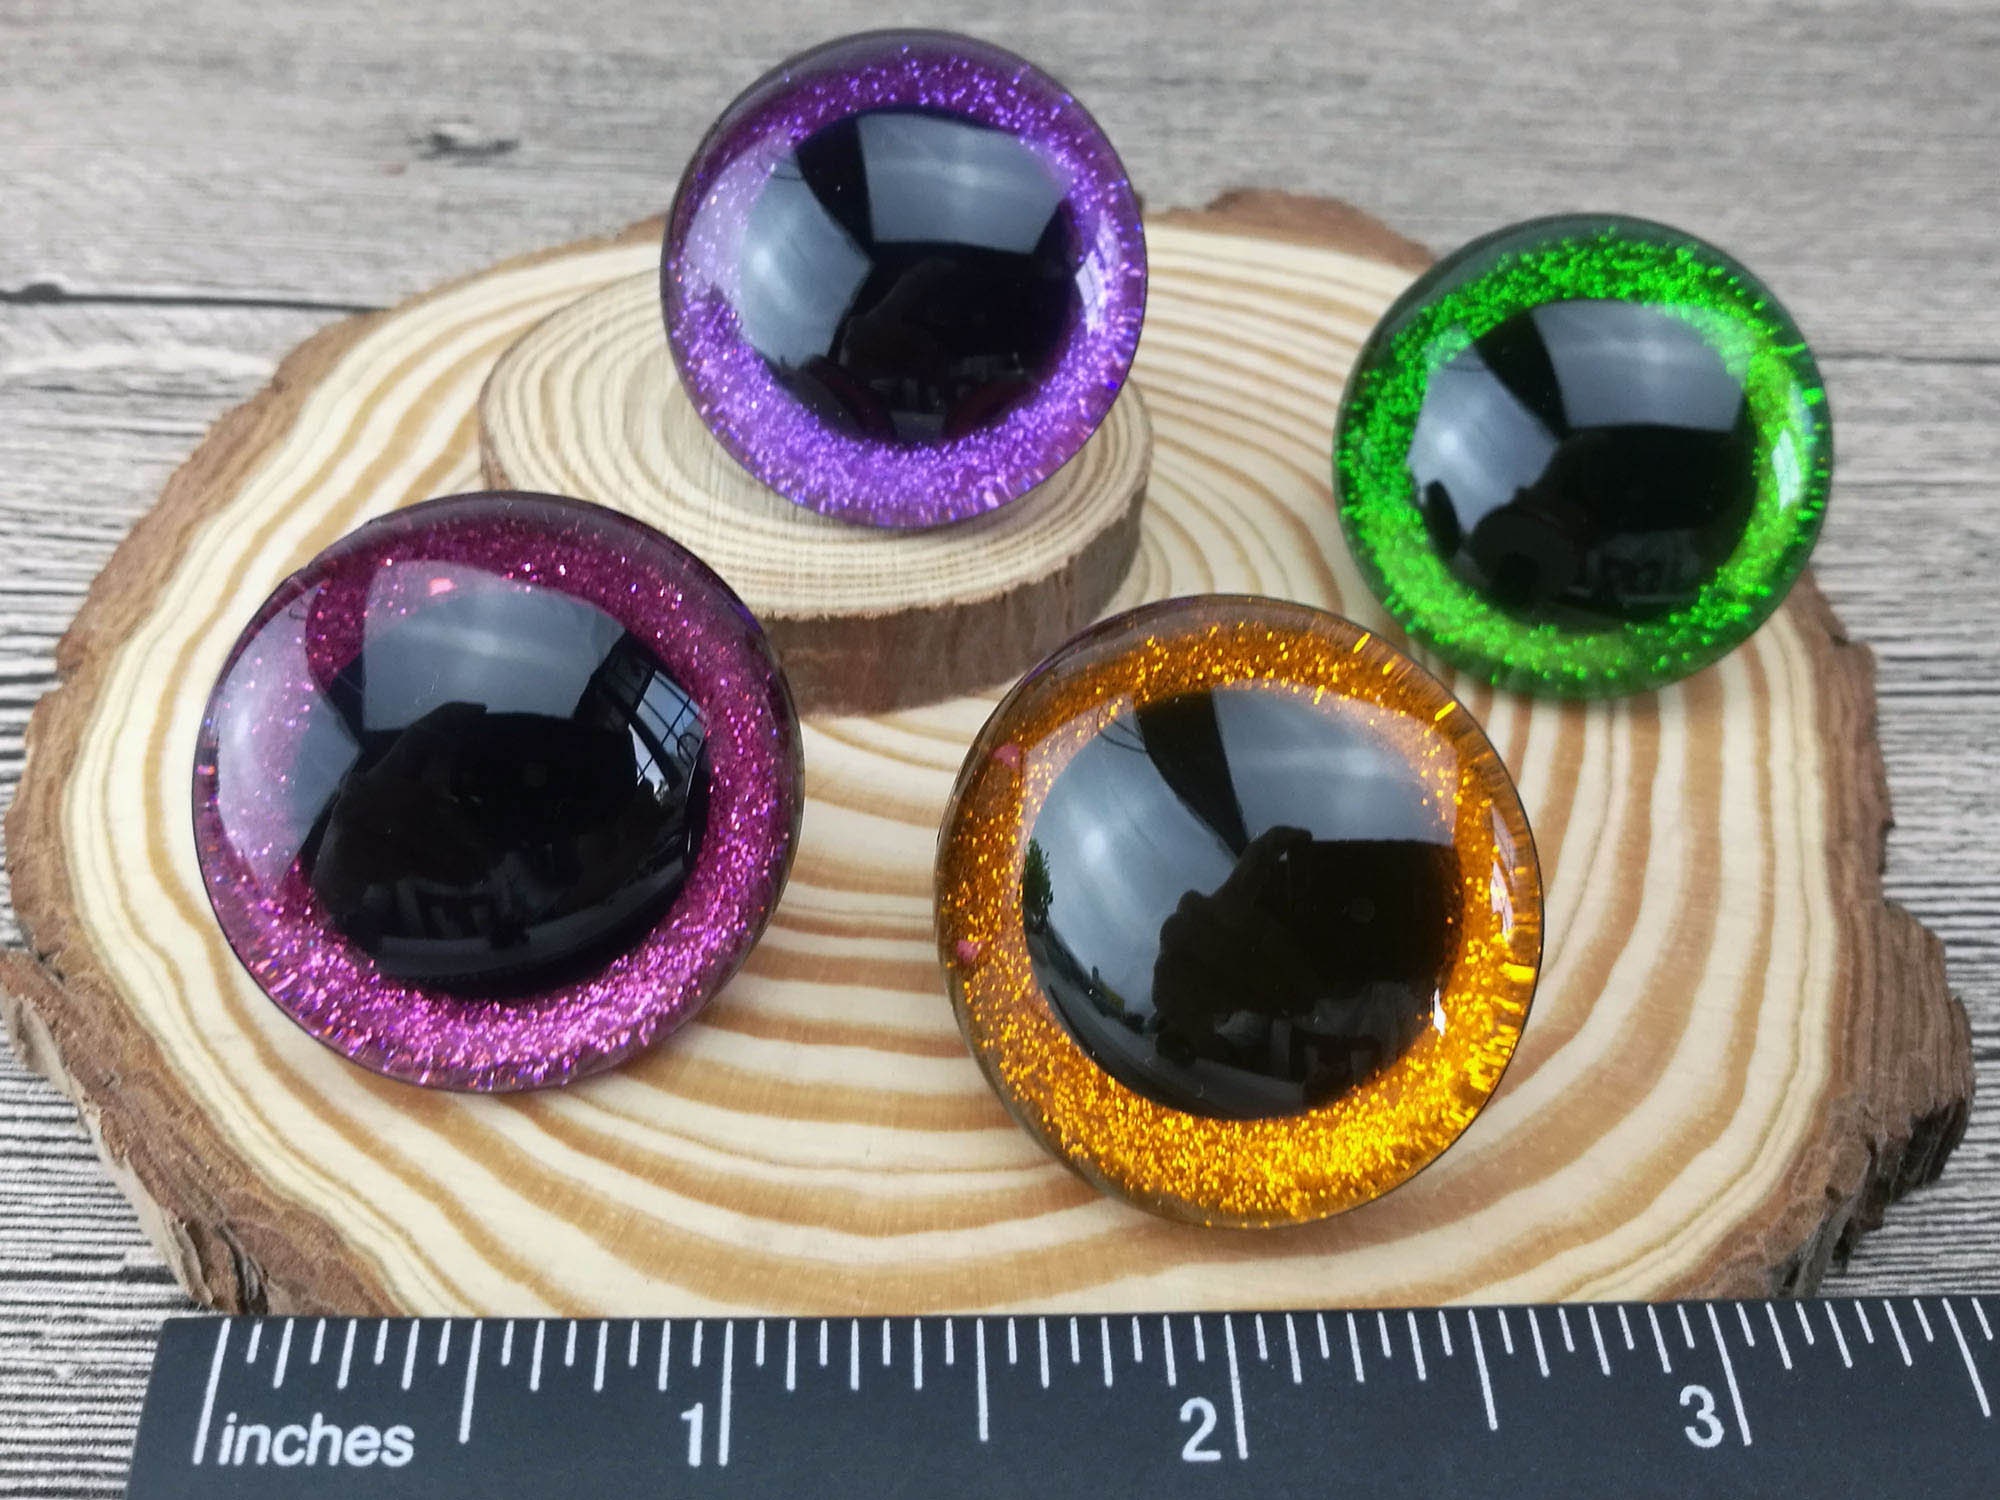 12mm Colorful Safety Eyes for Amigurumi Crochet Puppet Doll Animal